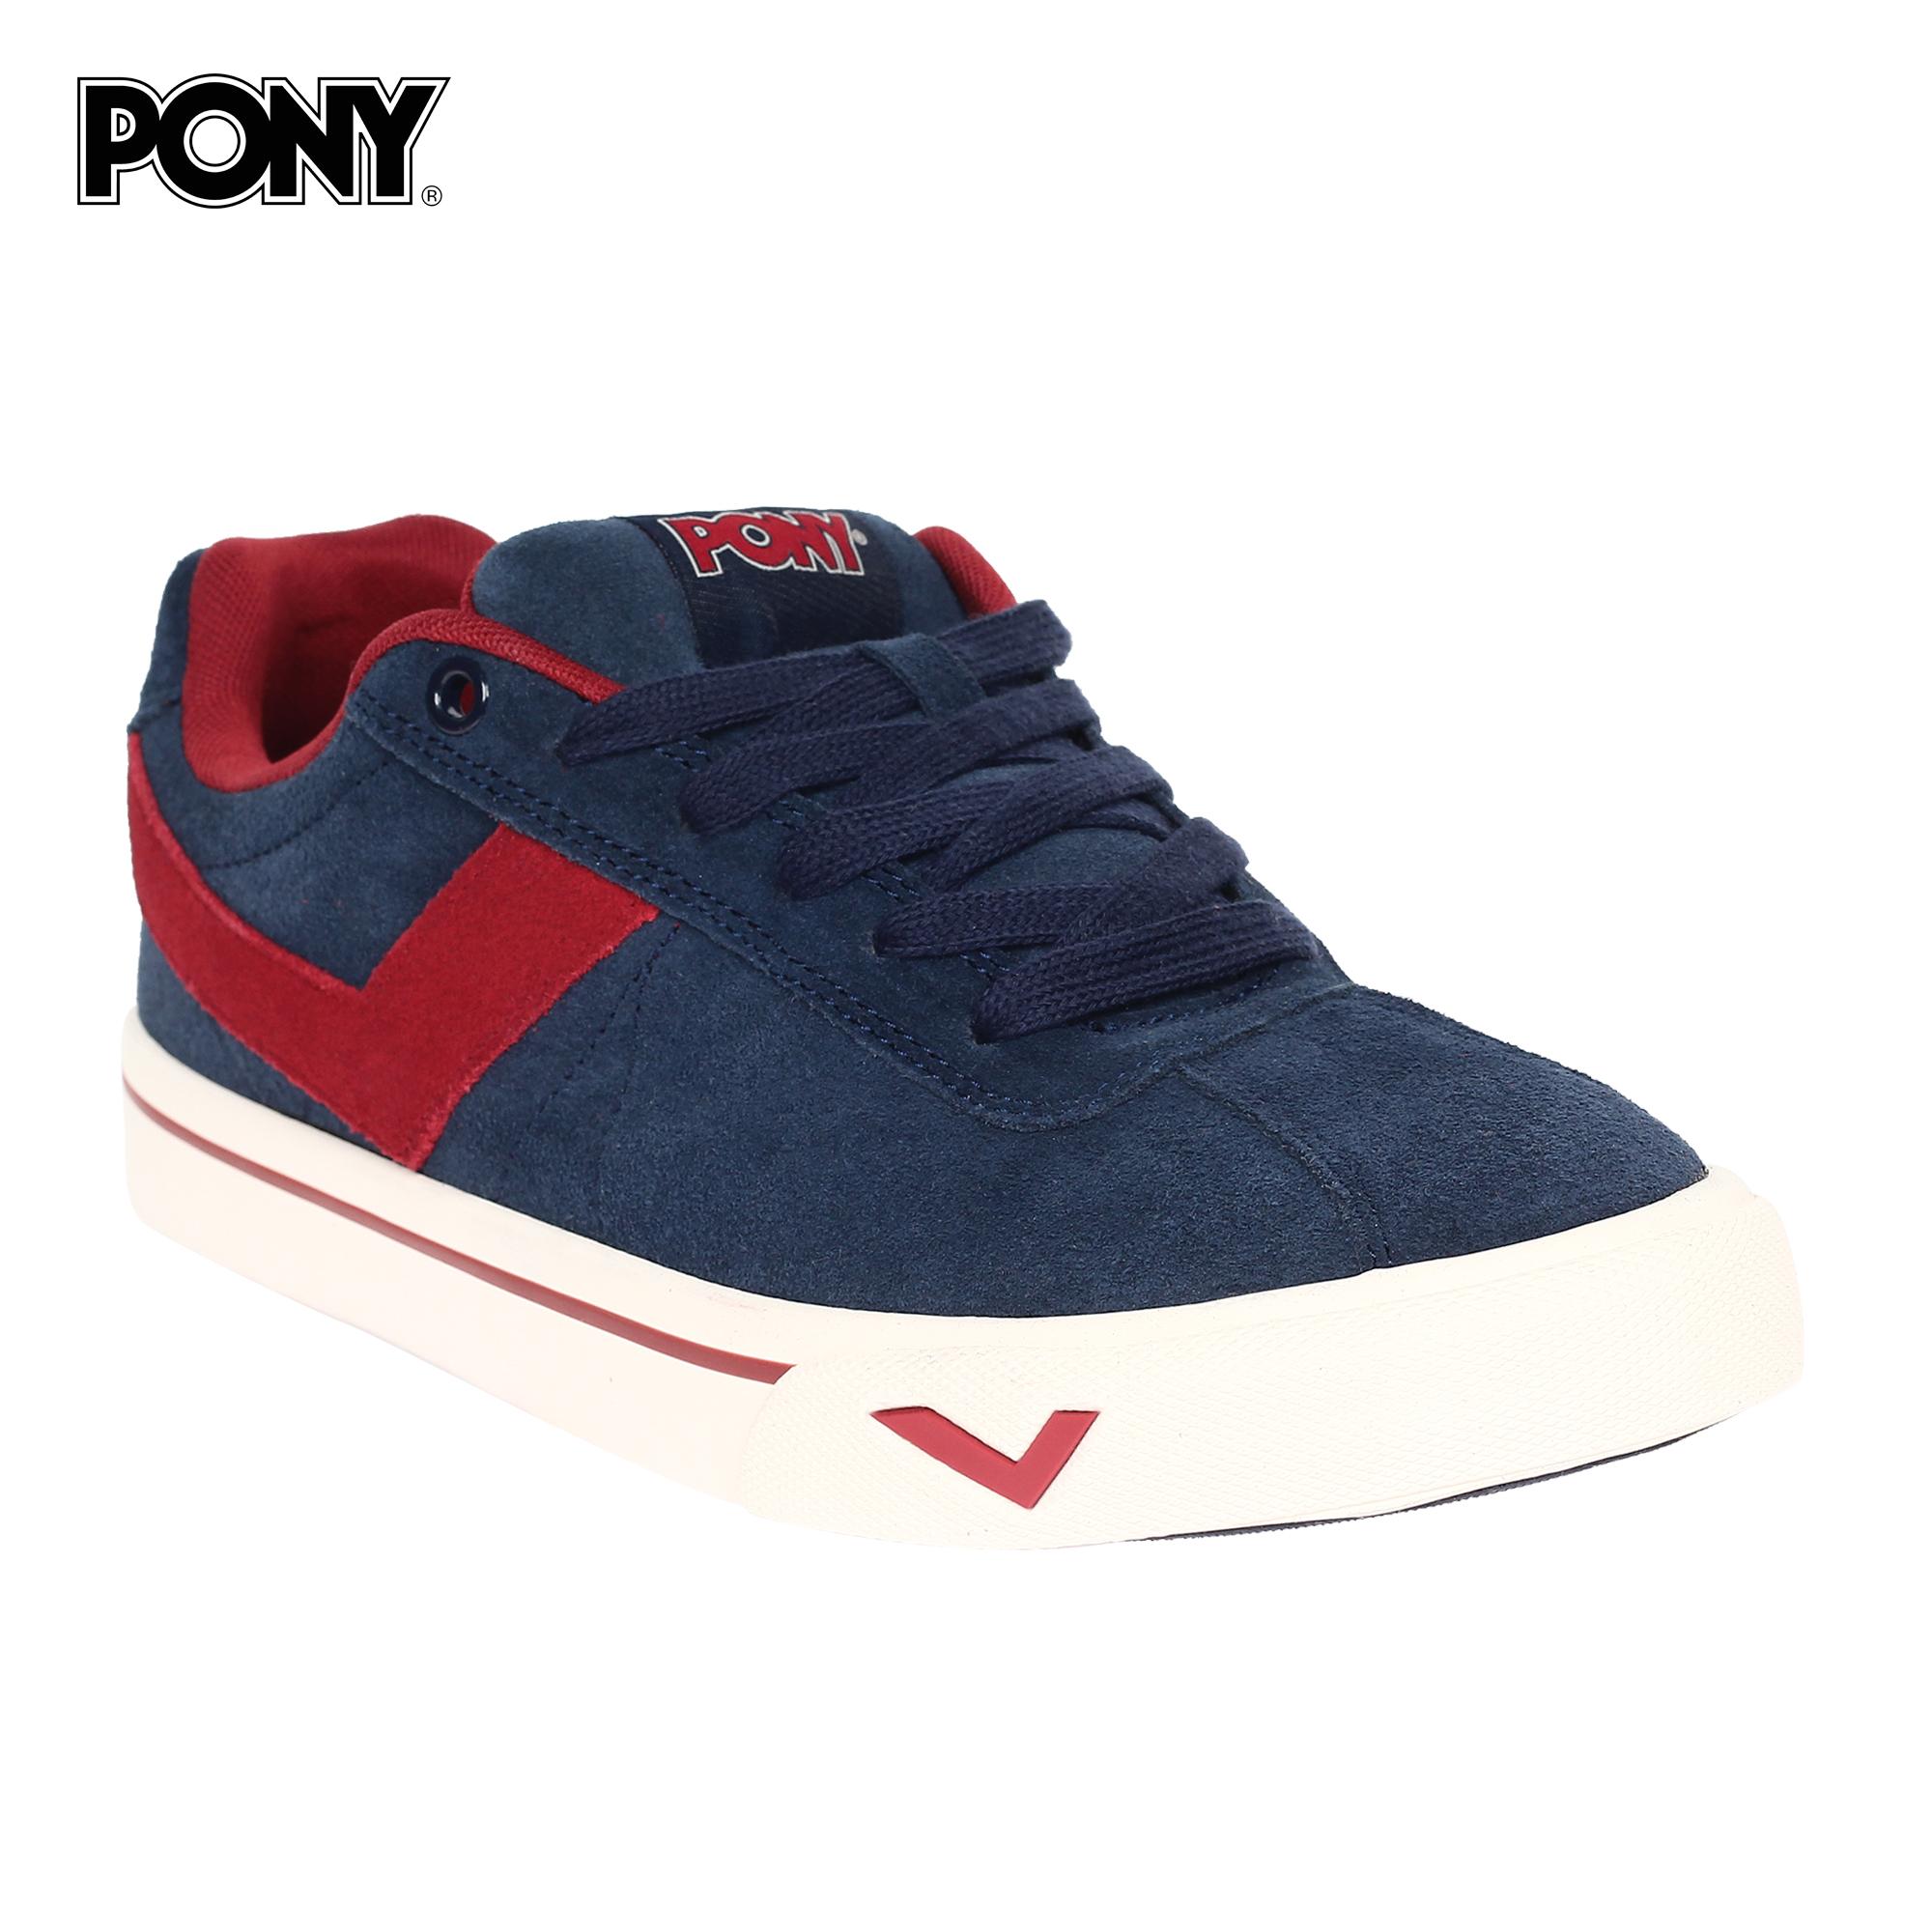 red pony sneakers